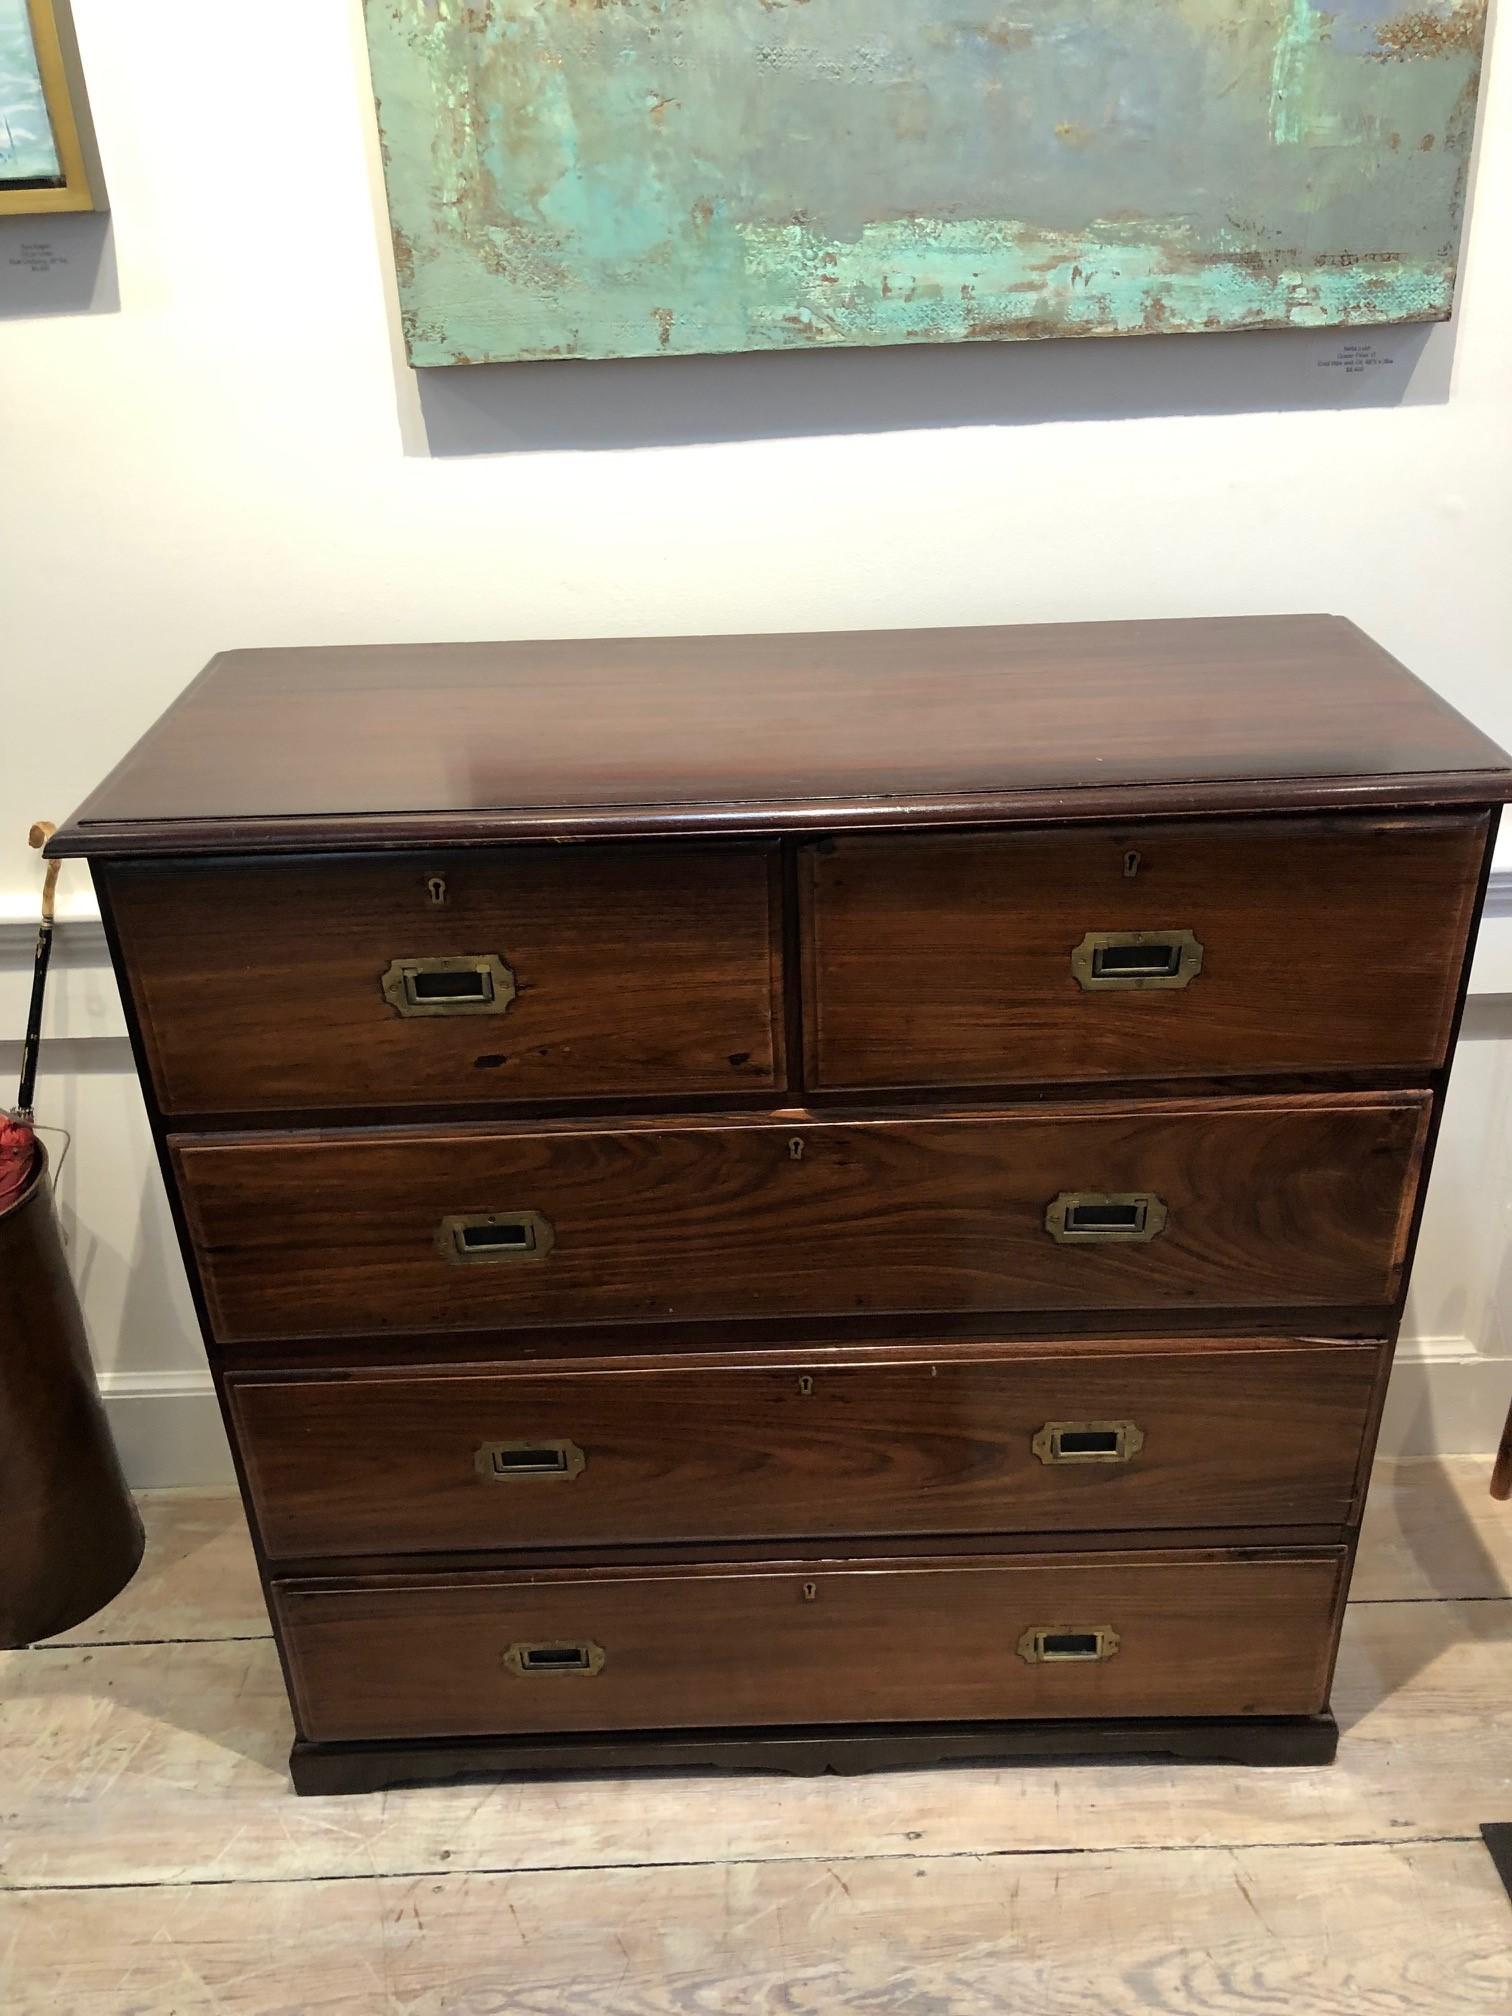 British campaign chest of drawers in rosewood from the early 1900s. In classic campaign style, the chest is in two parts to allow for easier transportation complete with flush brass pulls. Secondary wood is also rosewood--a dense and exotic